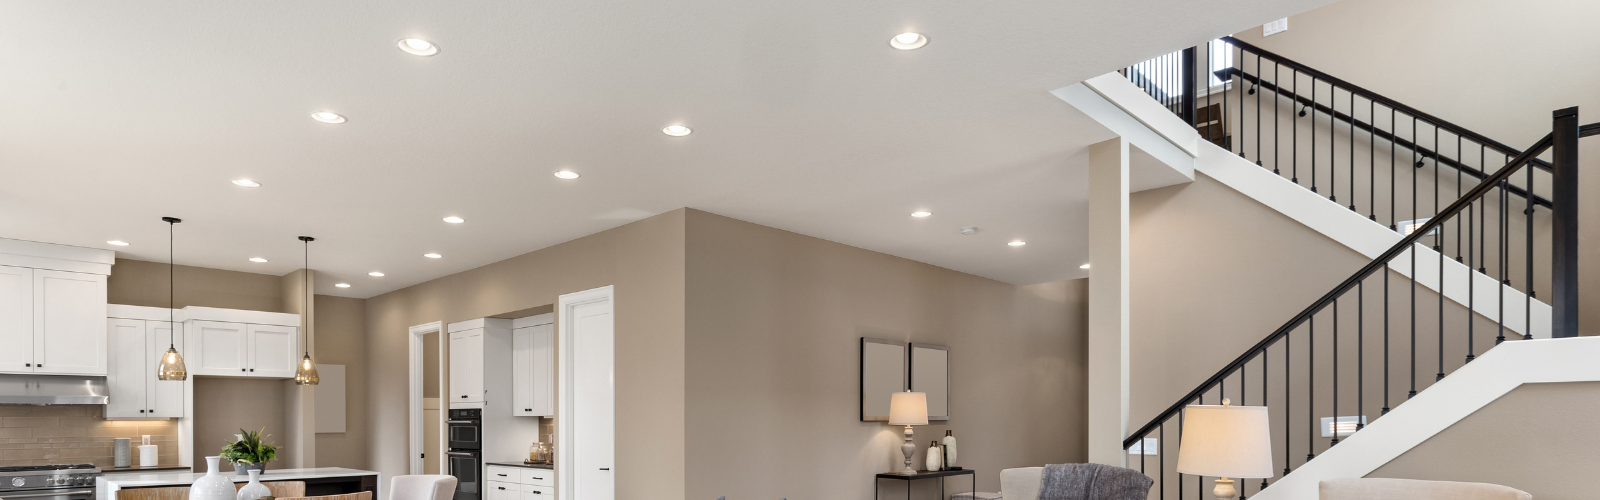 led recessed can solutions